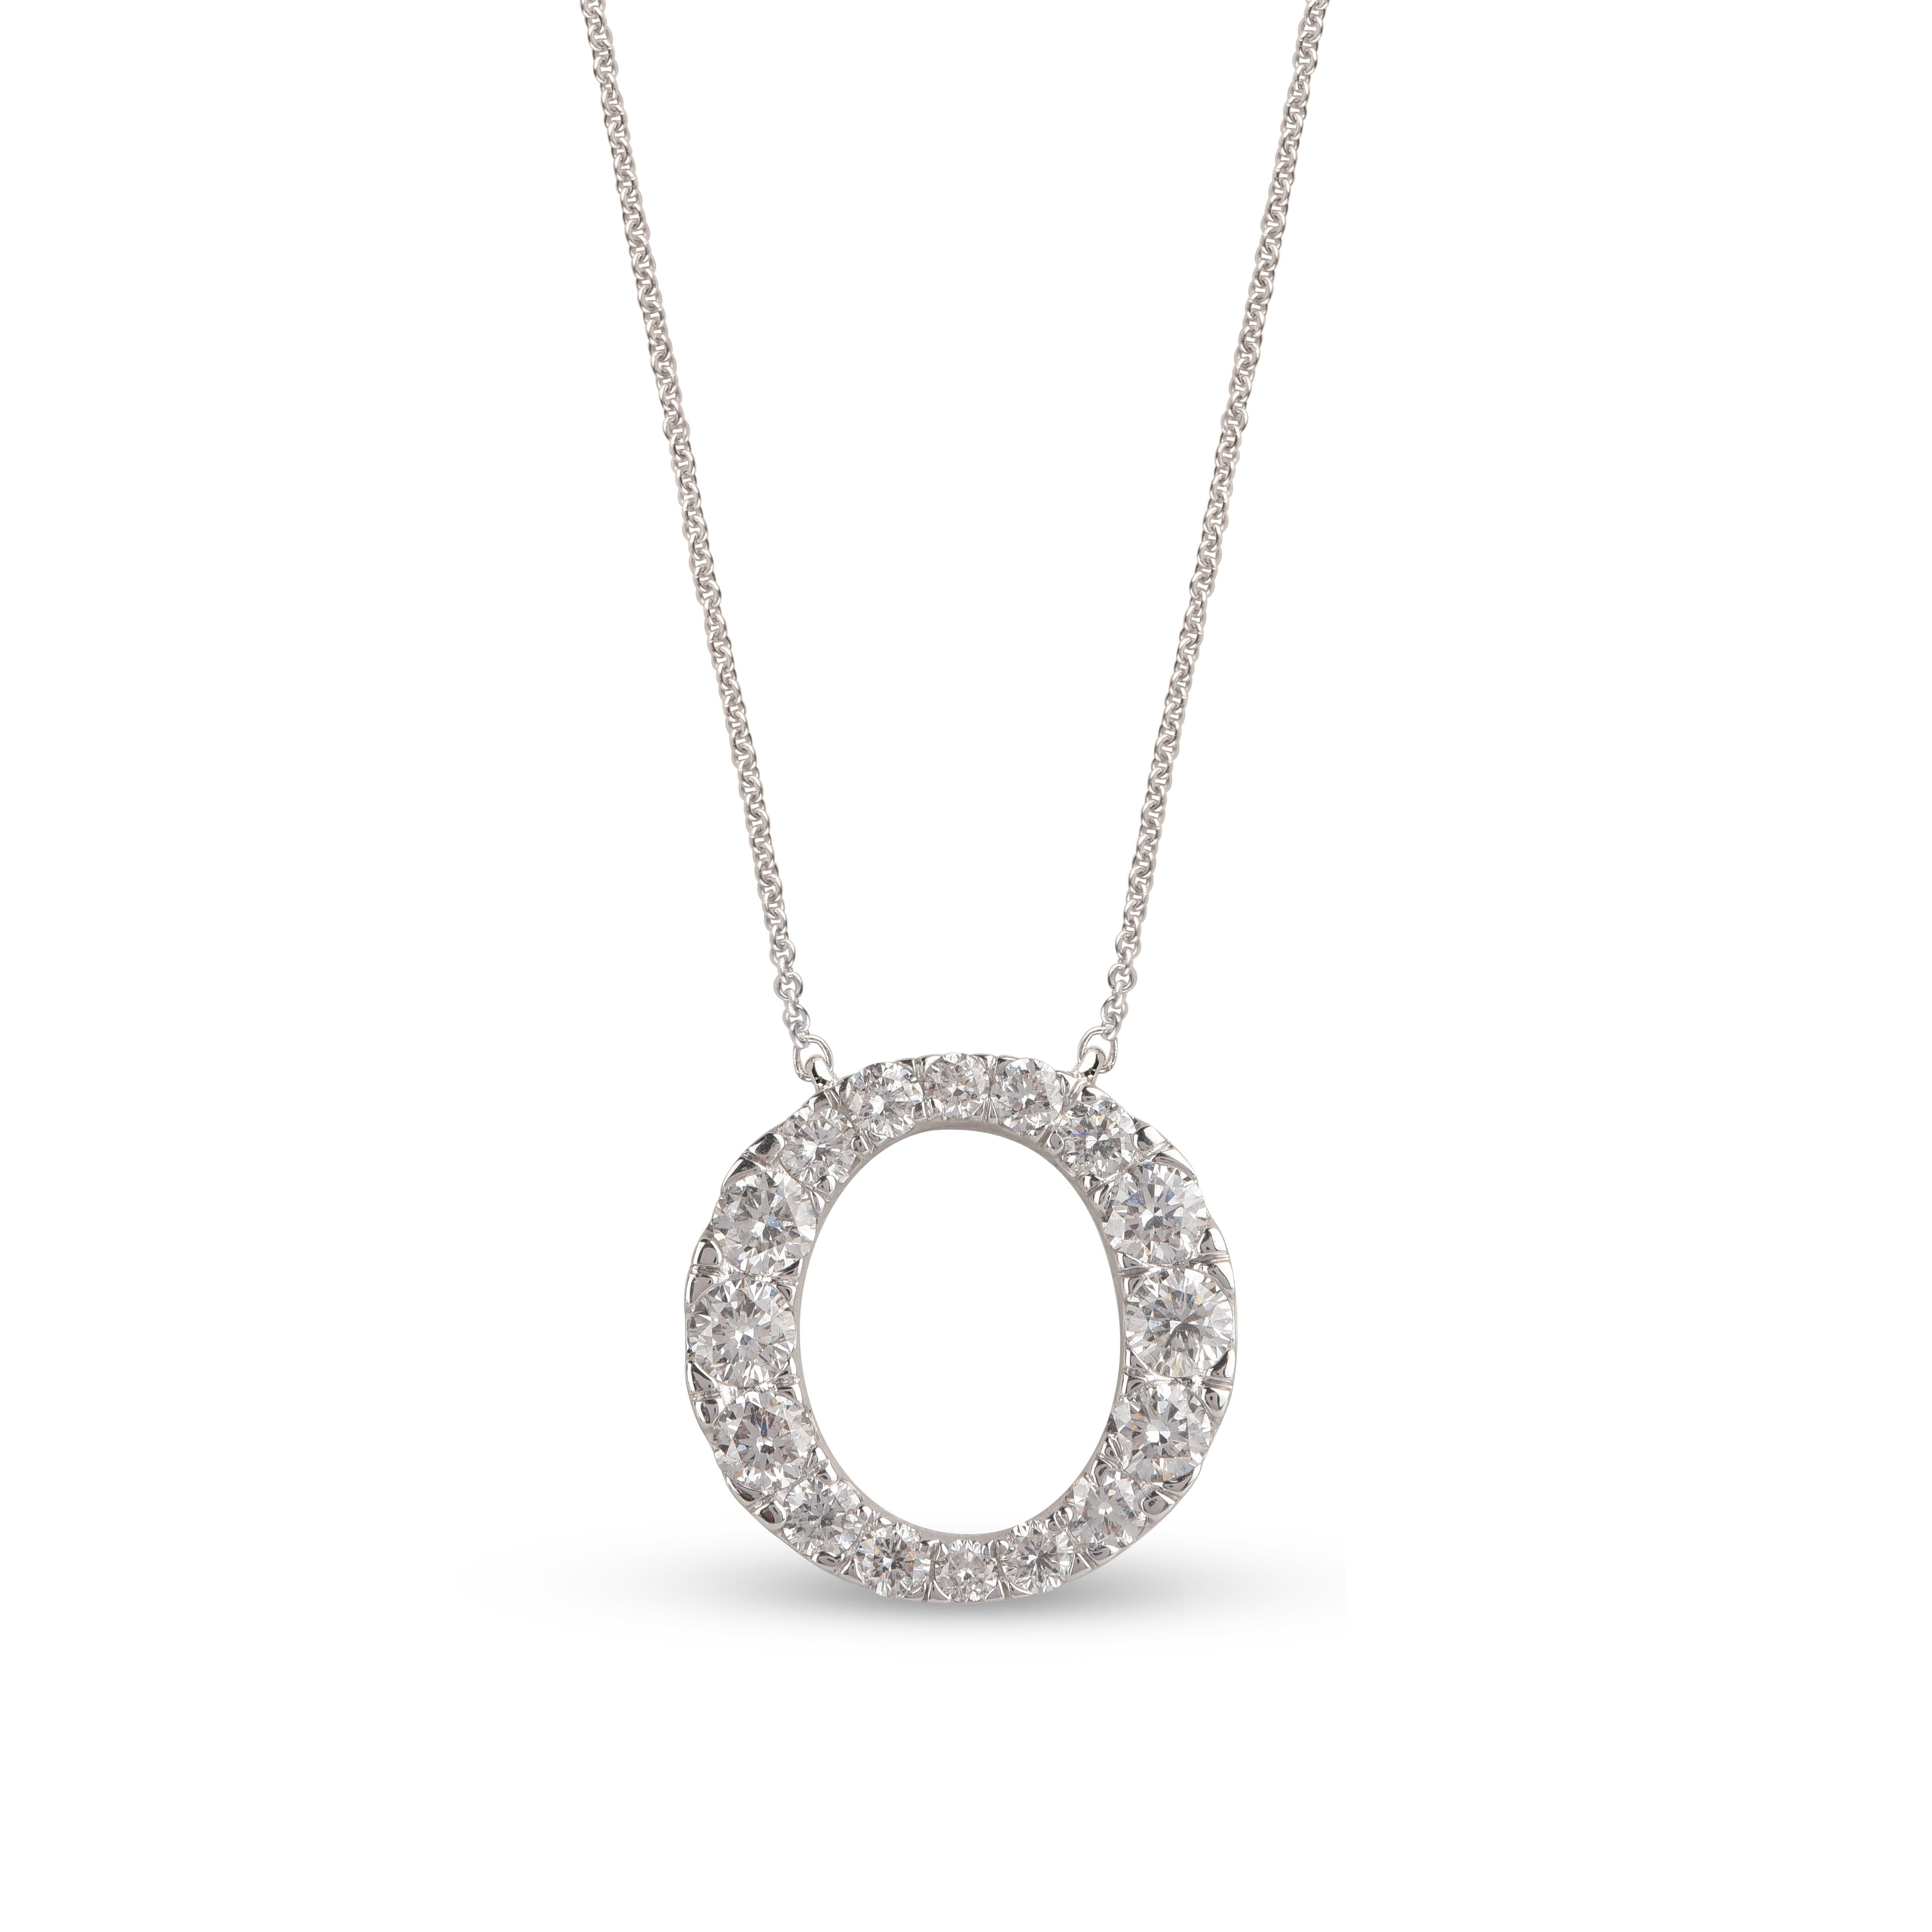 This alluring earring and pendant diamond set shines brightly with a total of 48 brilliant-cut diamonds embellished in prong setting and crafted in to perfection 14-karat white gold.

